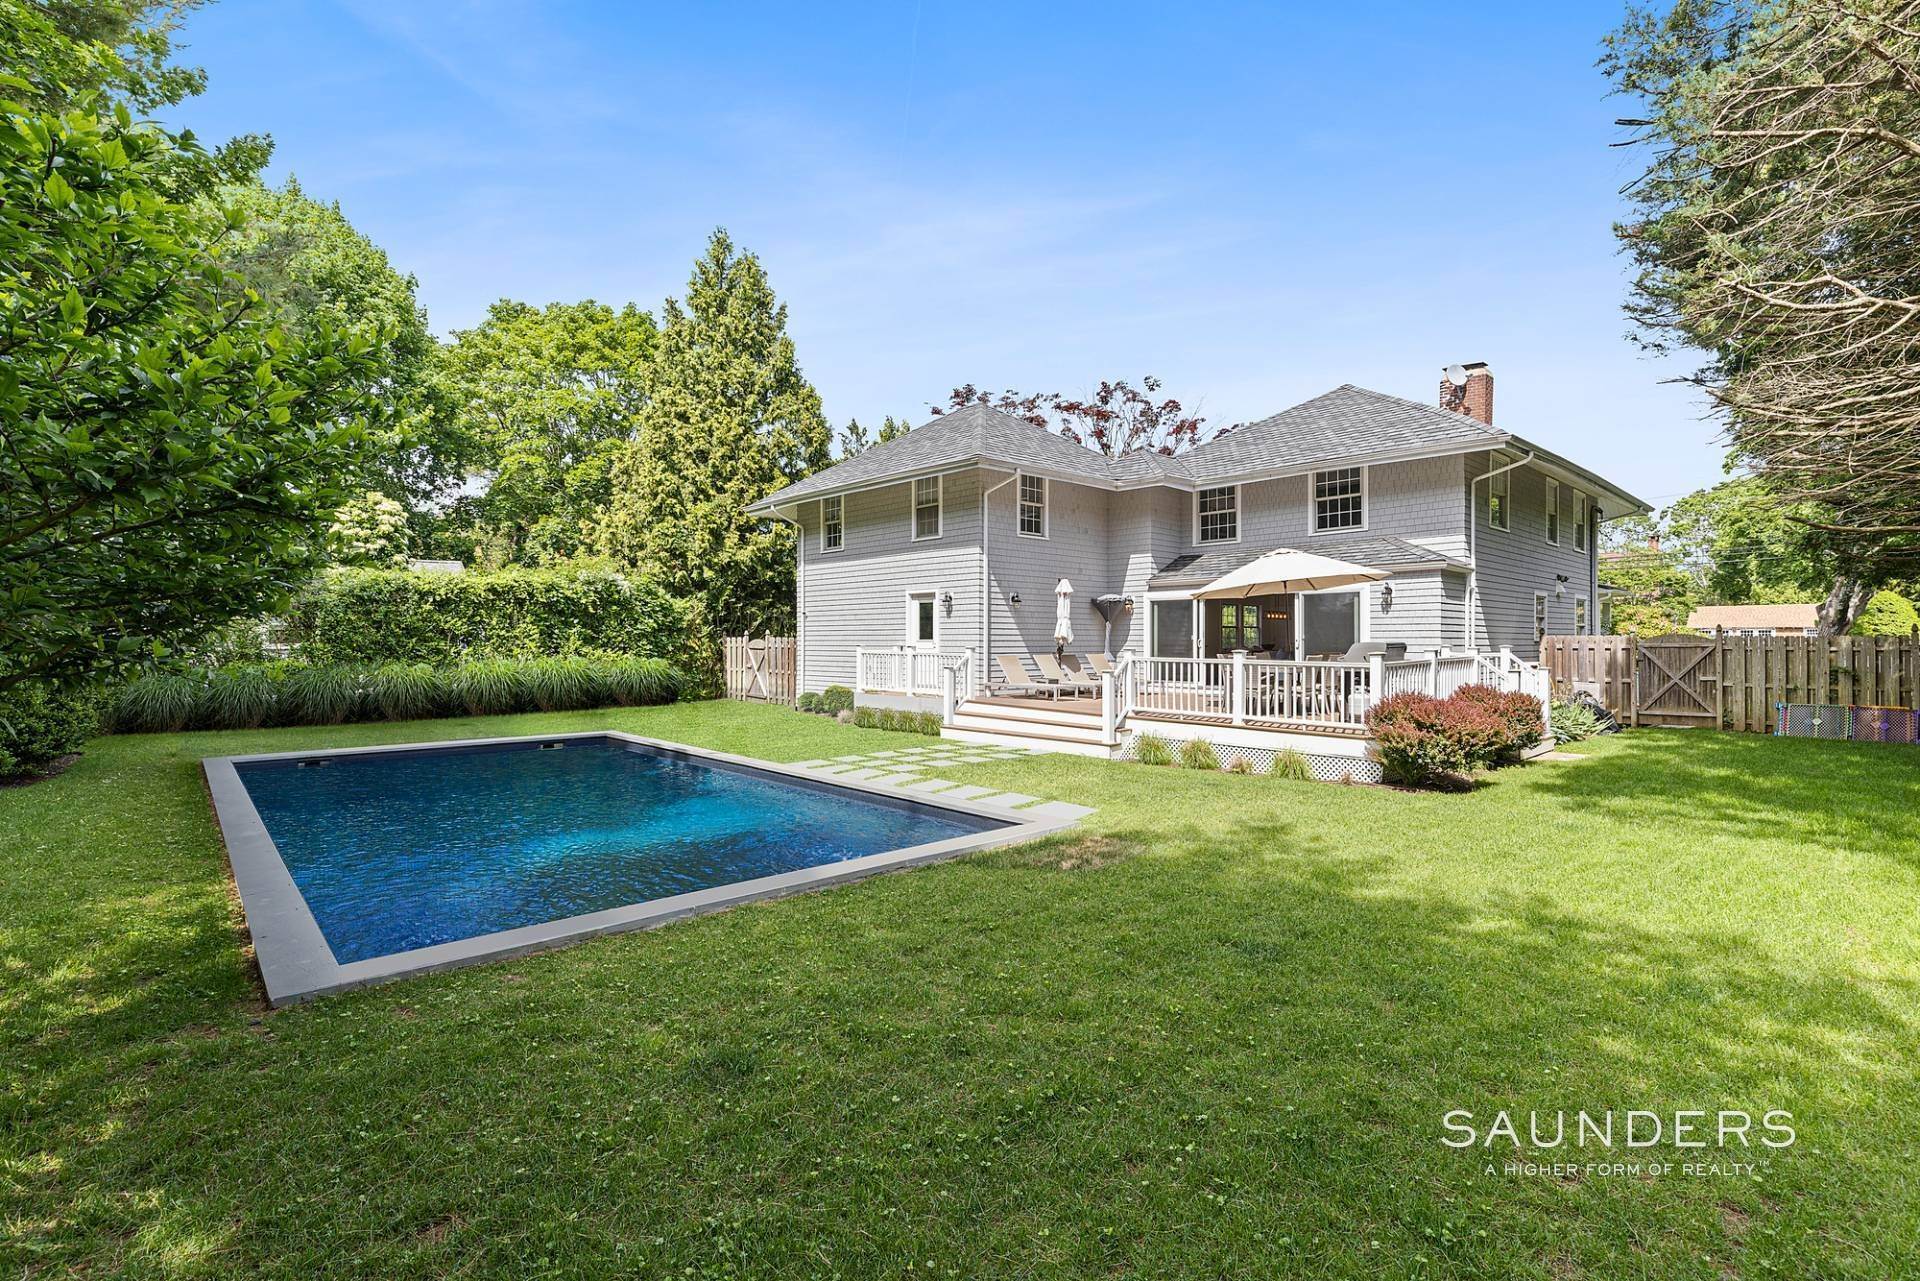 21. Single Family Homes for Sale at Renovated 1920s Farmhouse In The Village 25 Woodland Avenue, Westhampton Beach Village, NY 11978